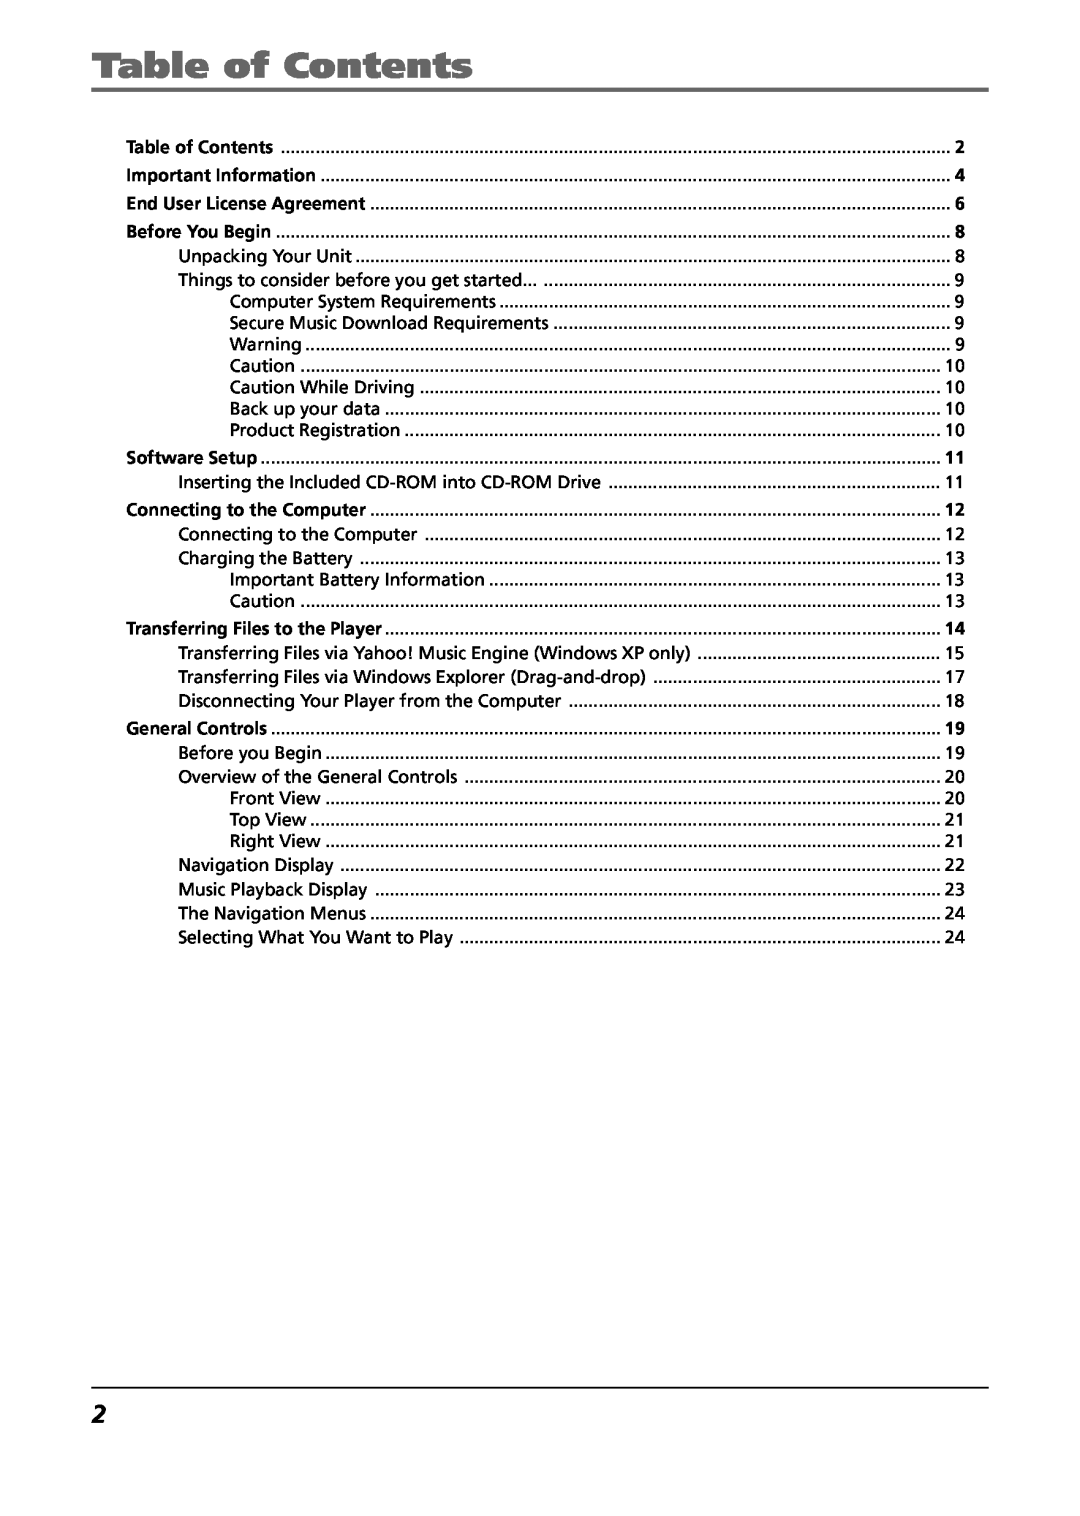 RCA H115/H125 manual Table of Contents 